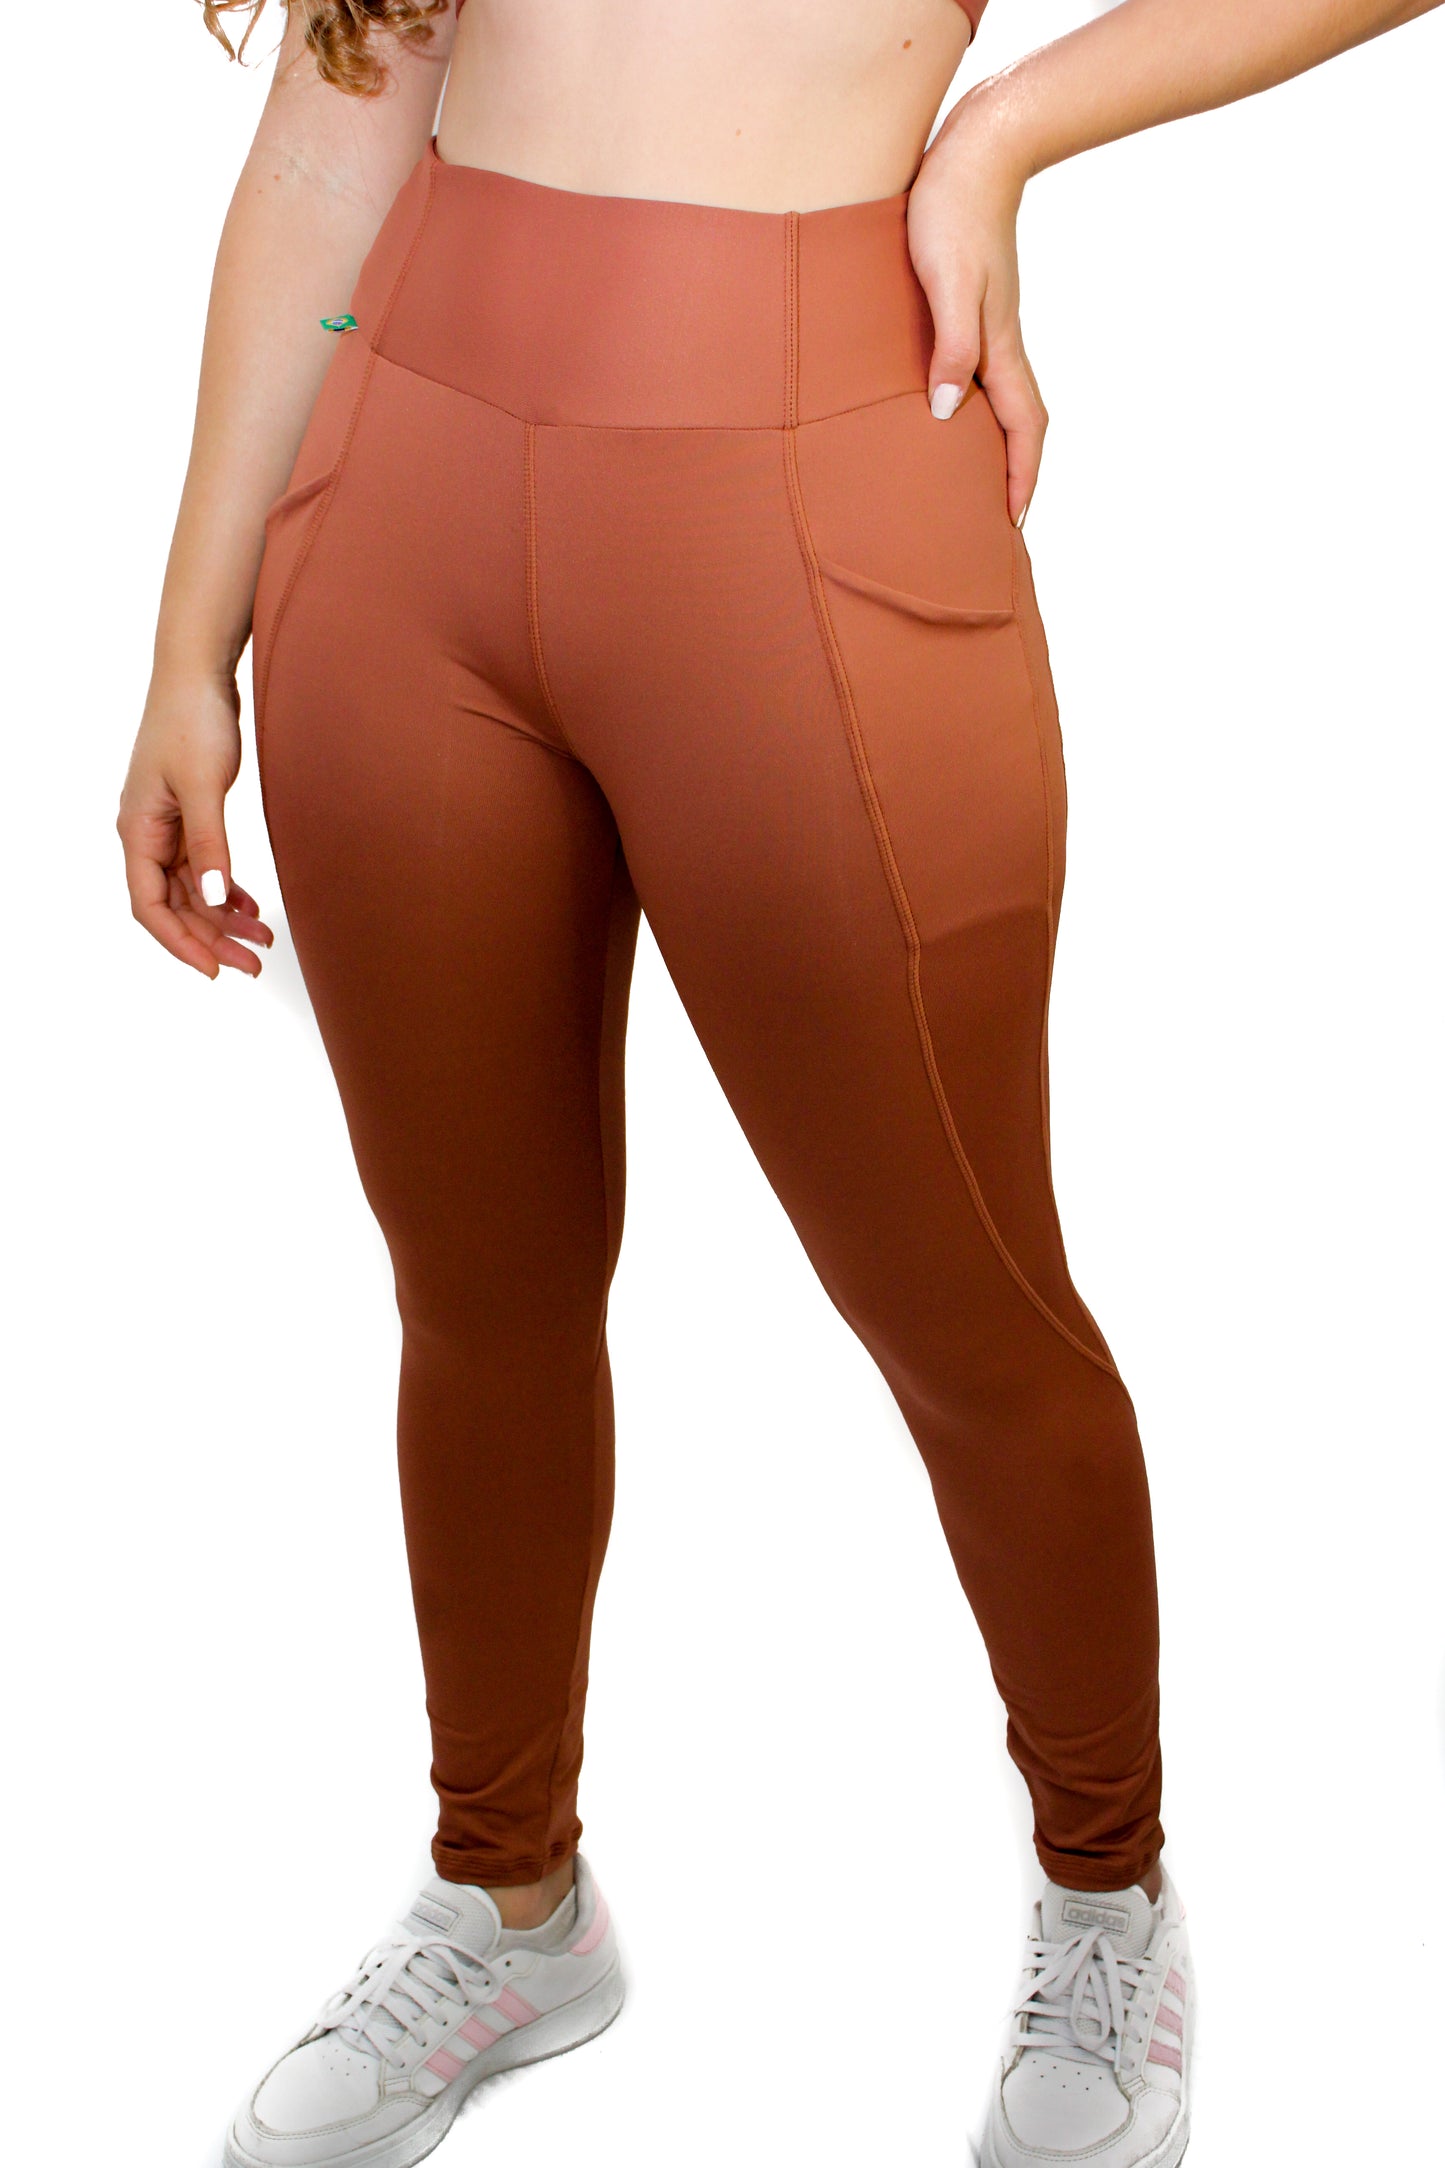 Light Brown Classic Cut Style Leggings with Pocket - Eco Free